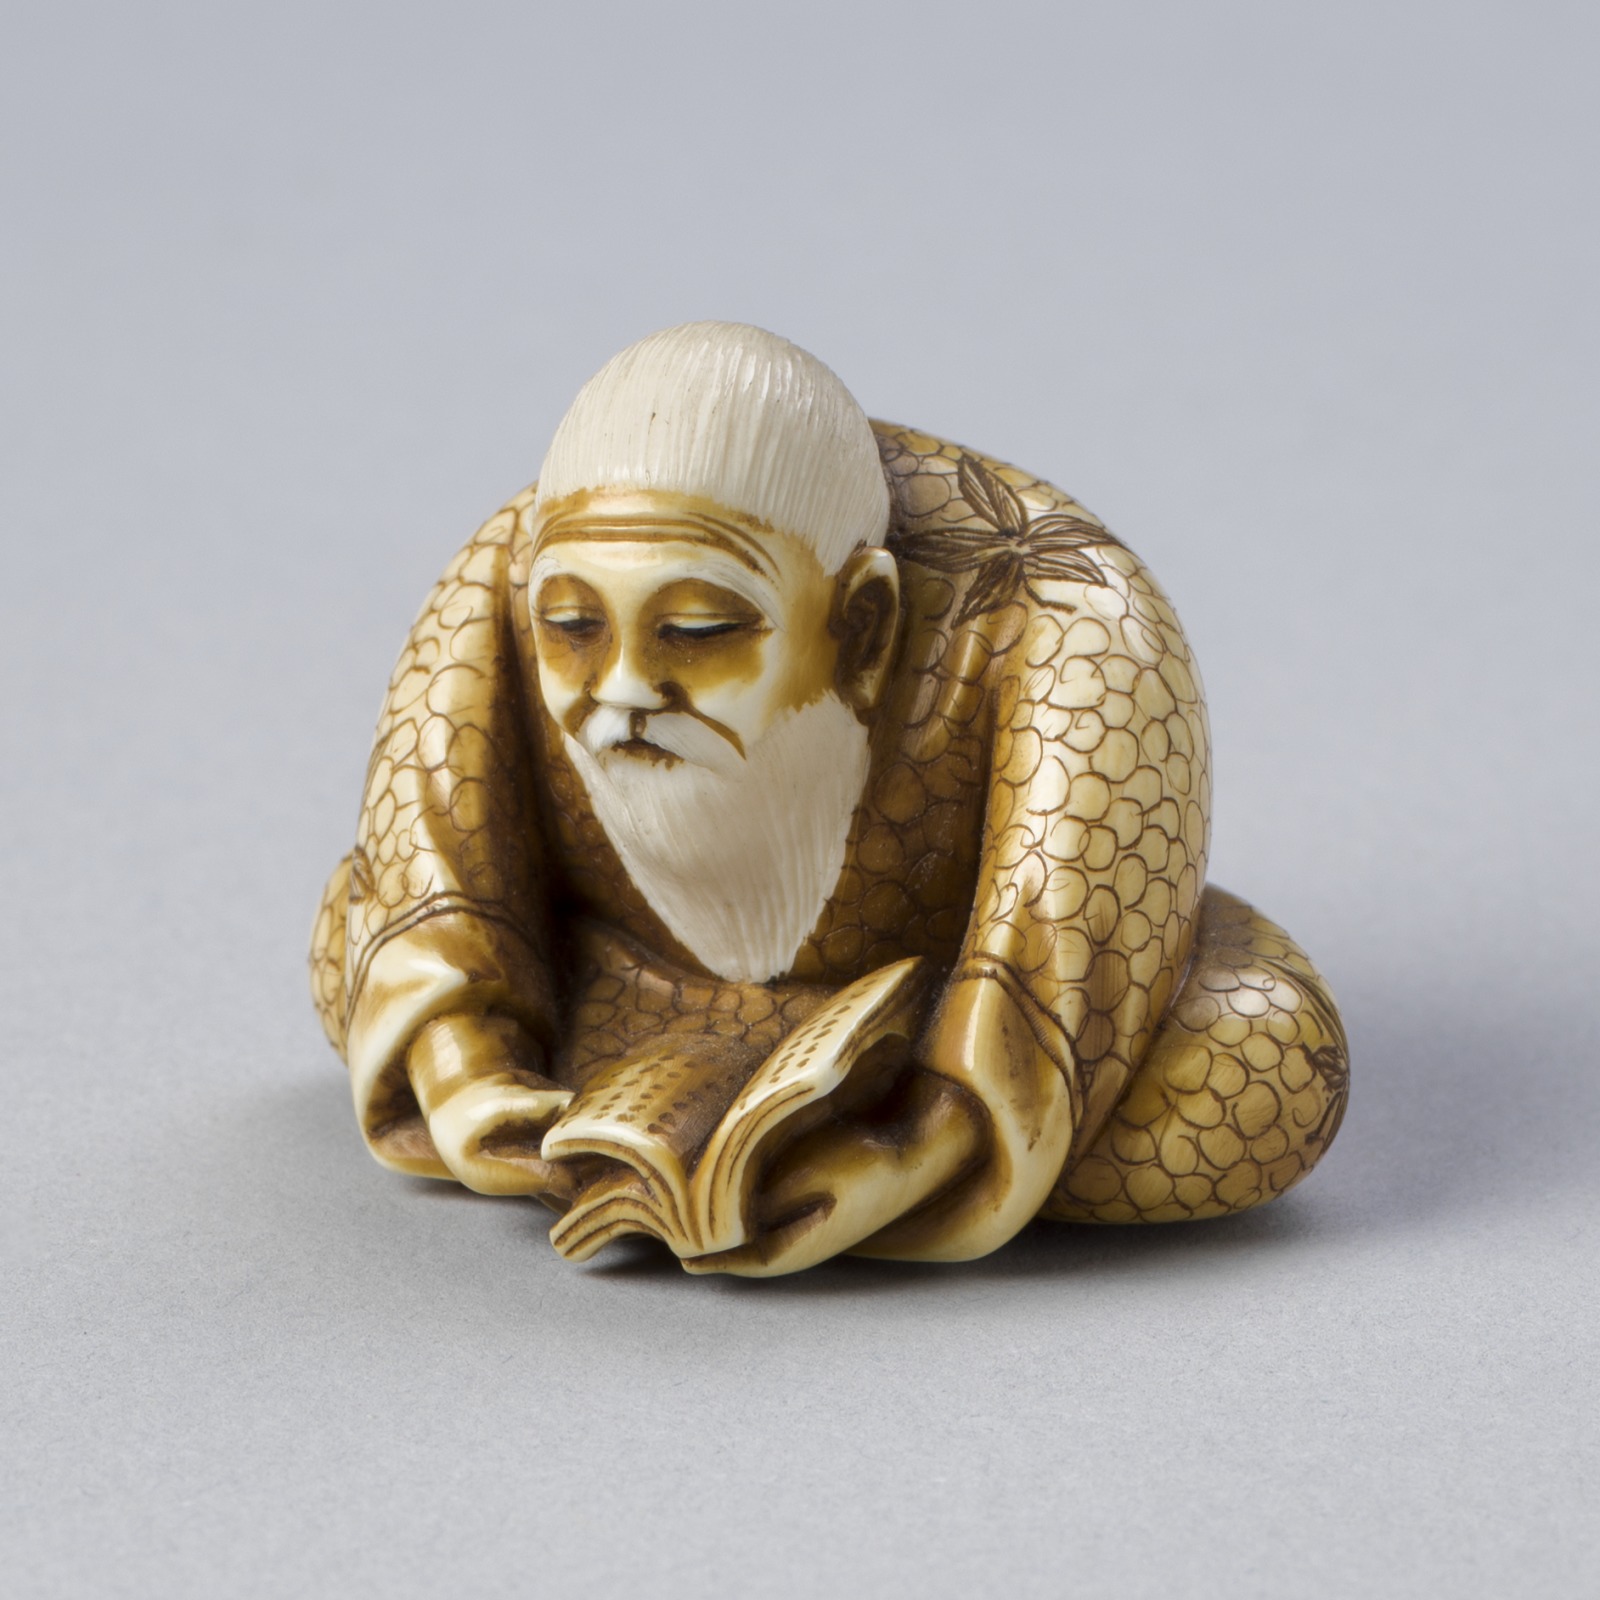 Netsuke Depicting an Old Man Reading a Book